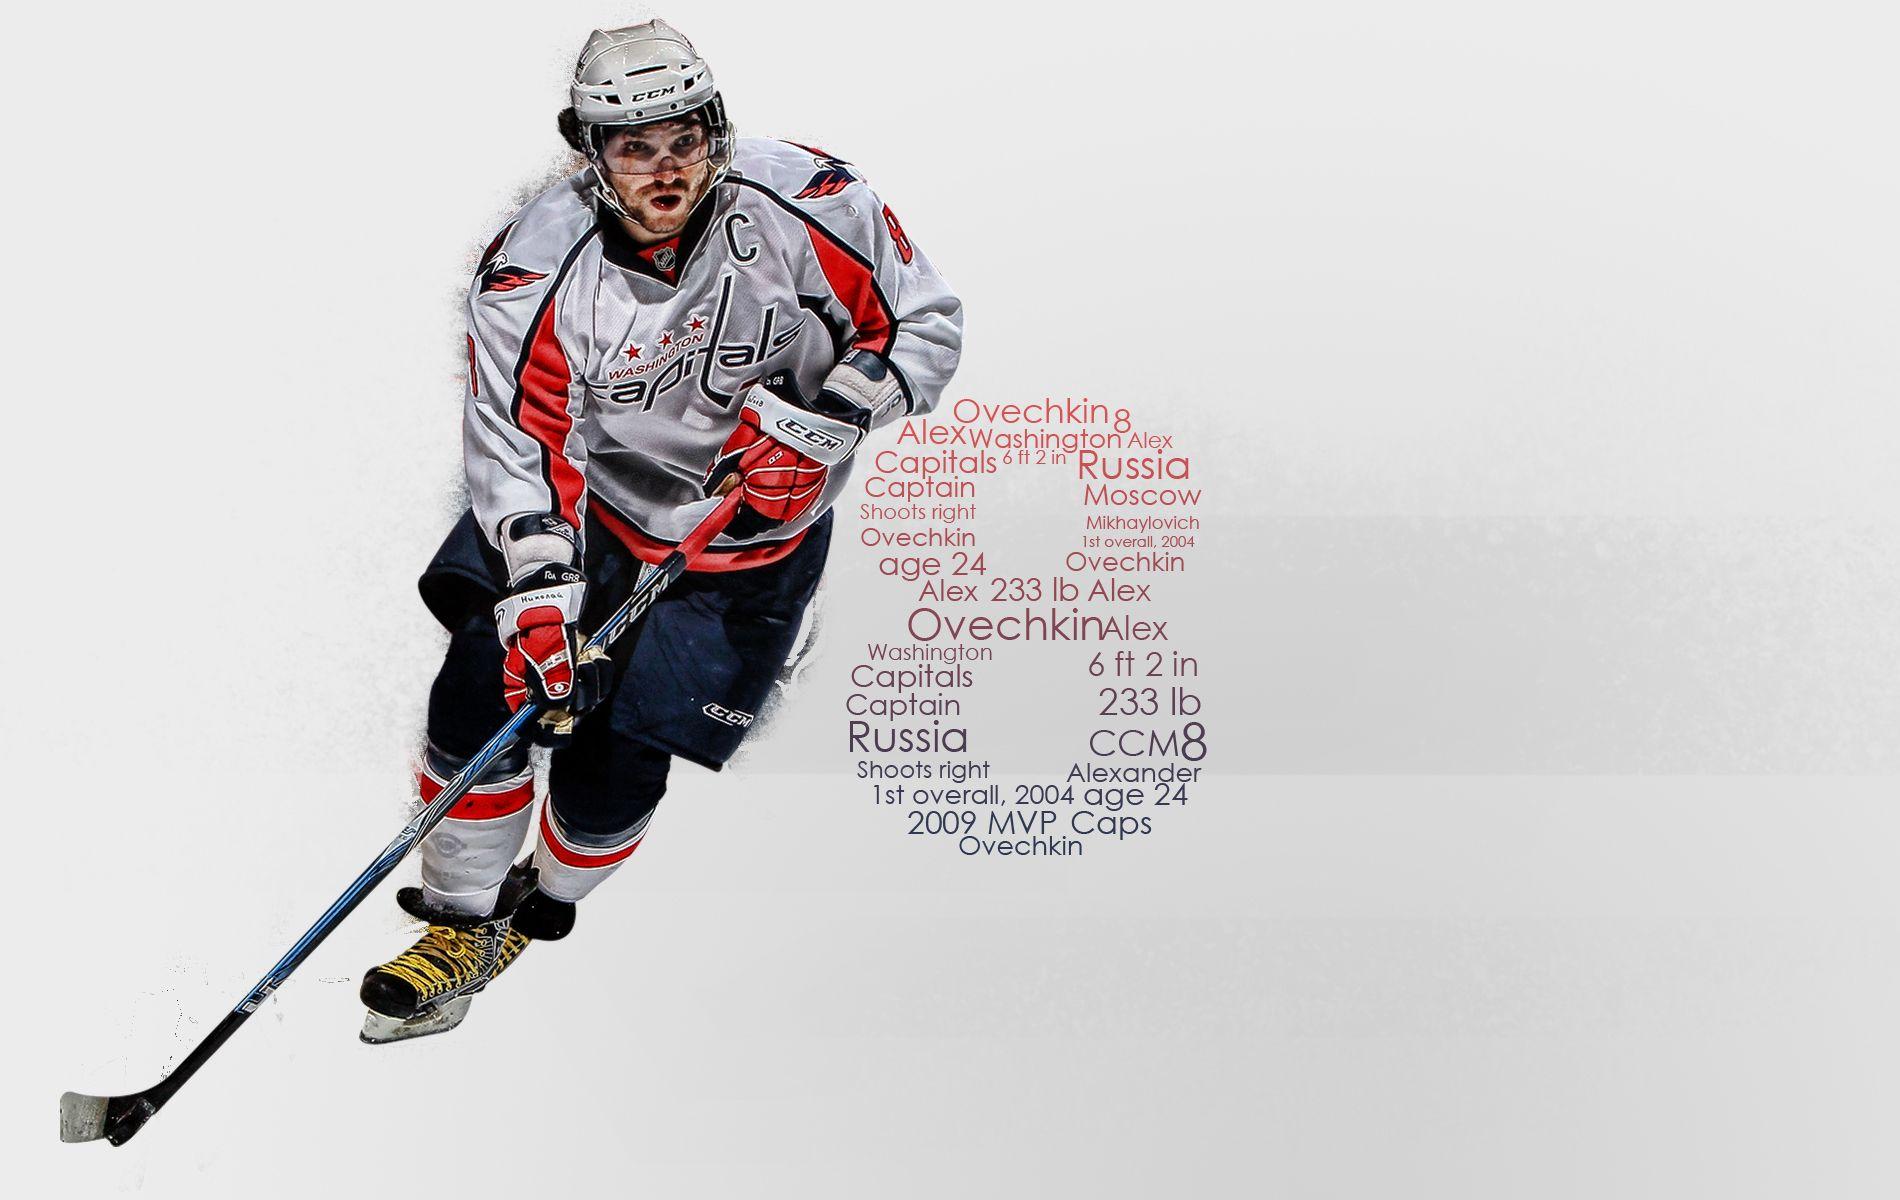 Alex Ovechkin Wallpaper High Resolution and Quality Download